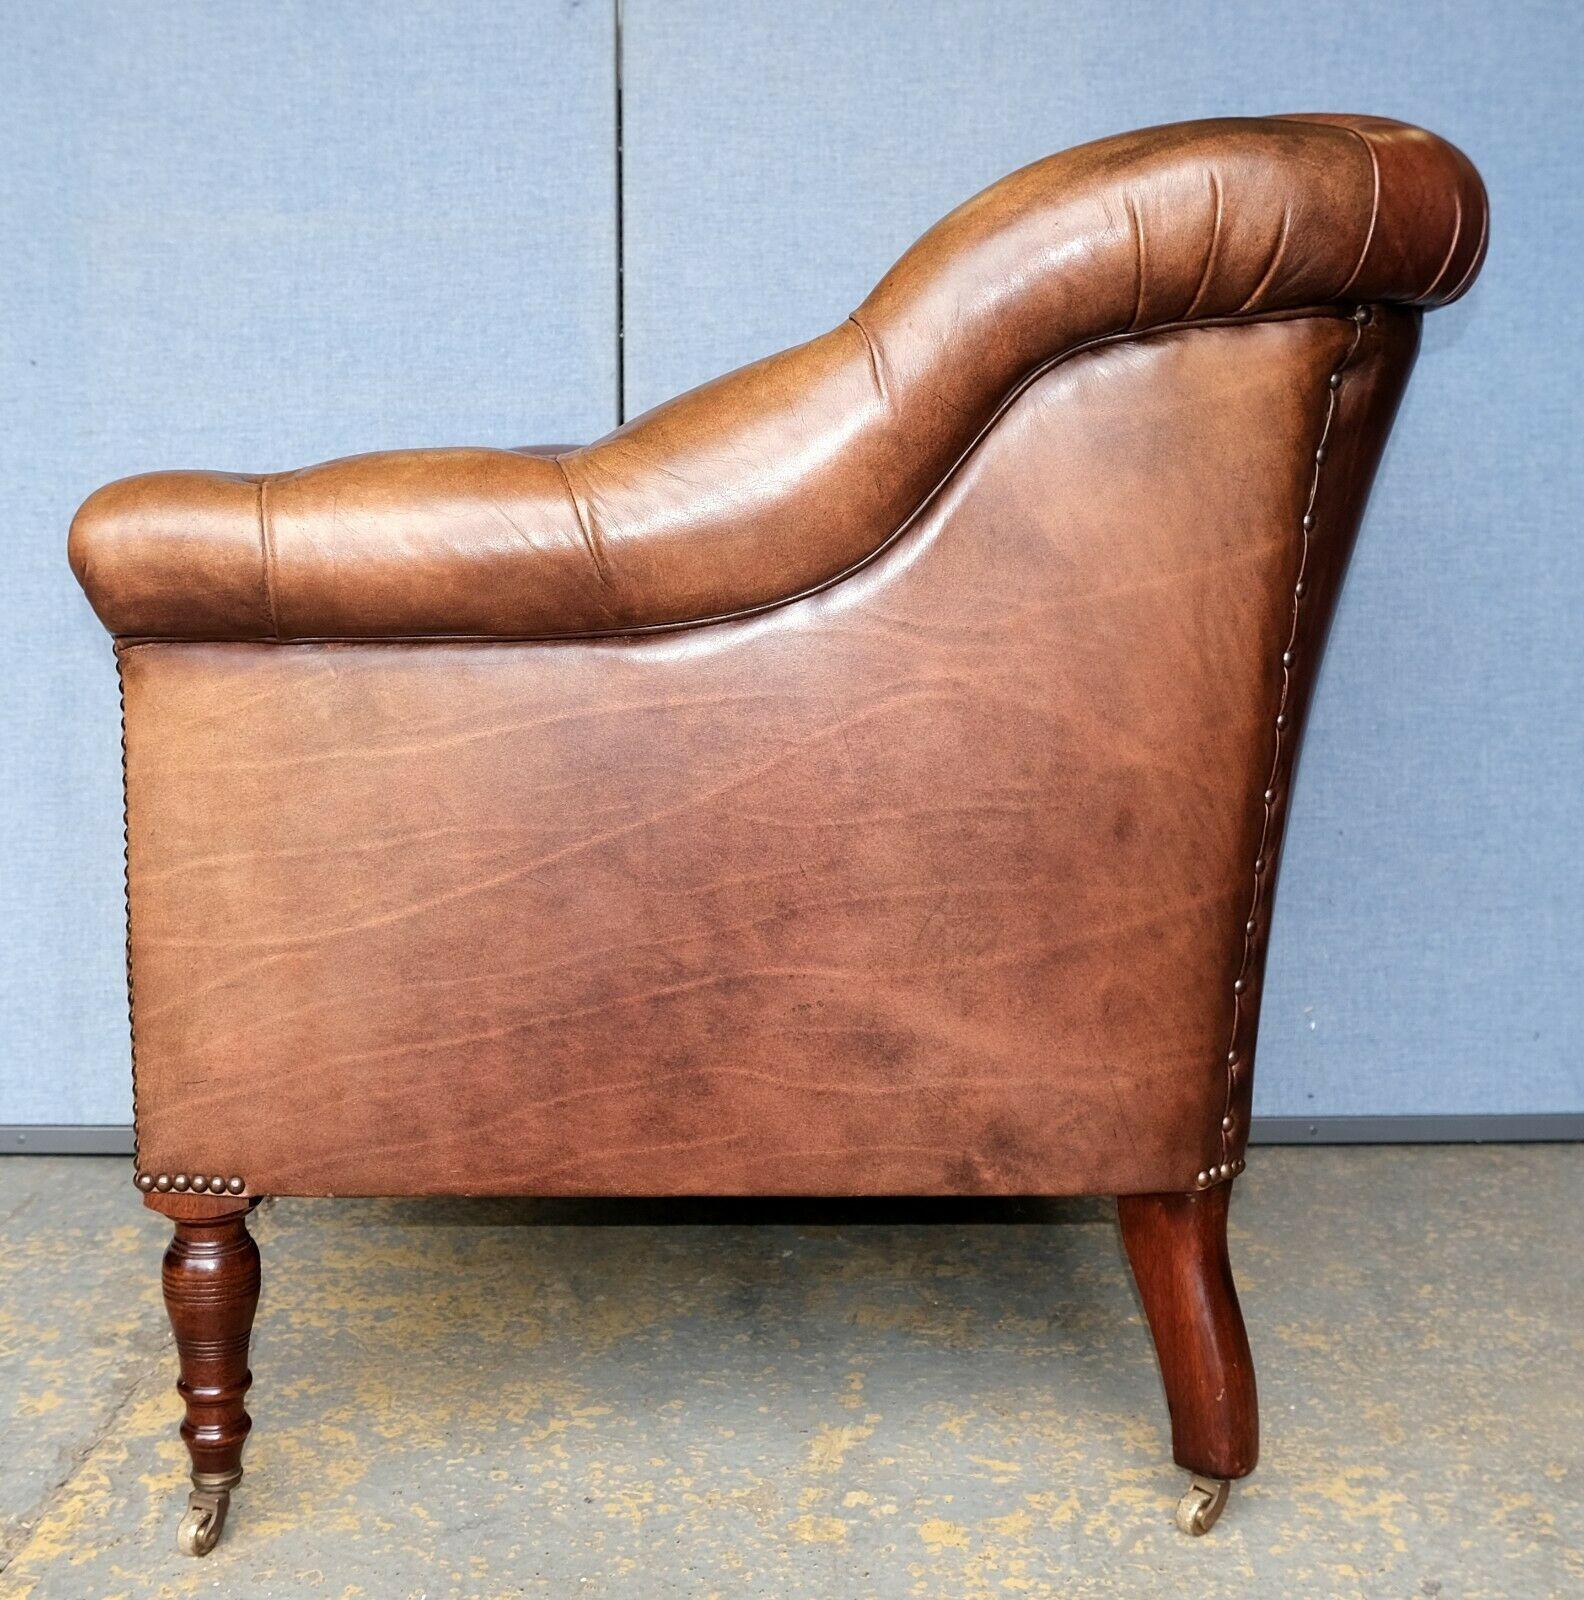 Hand-Crafted Georgeous Somerville George Smith Distress Brown Leather Chesterfield Armchair